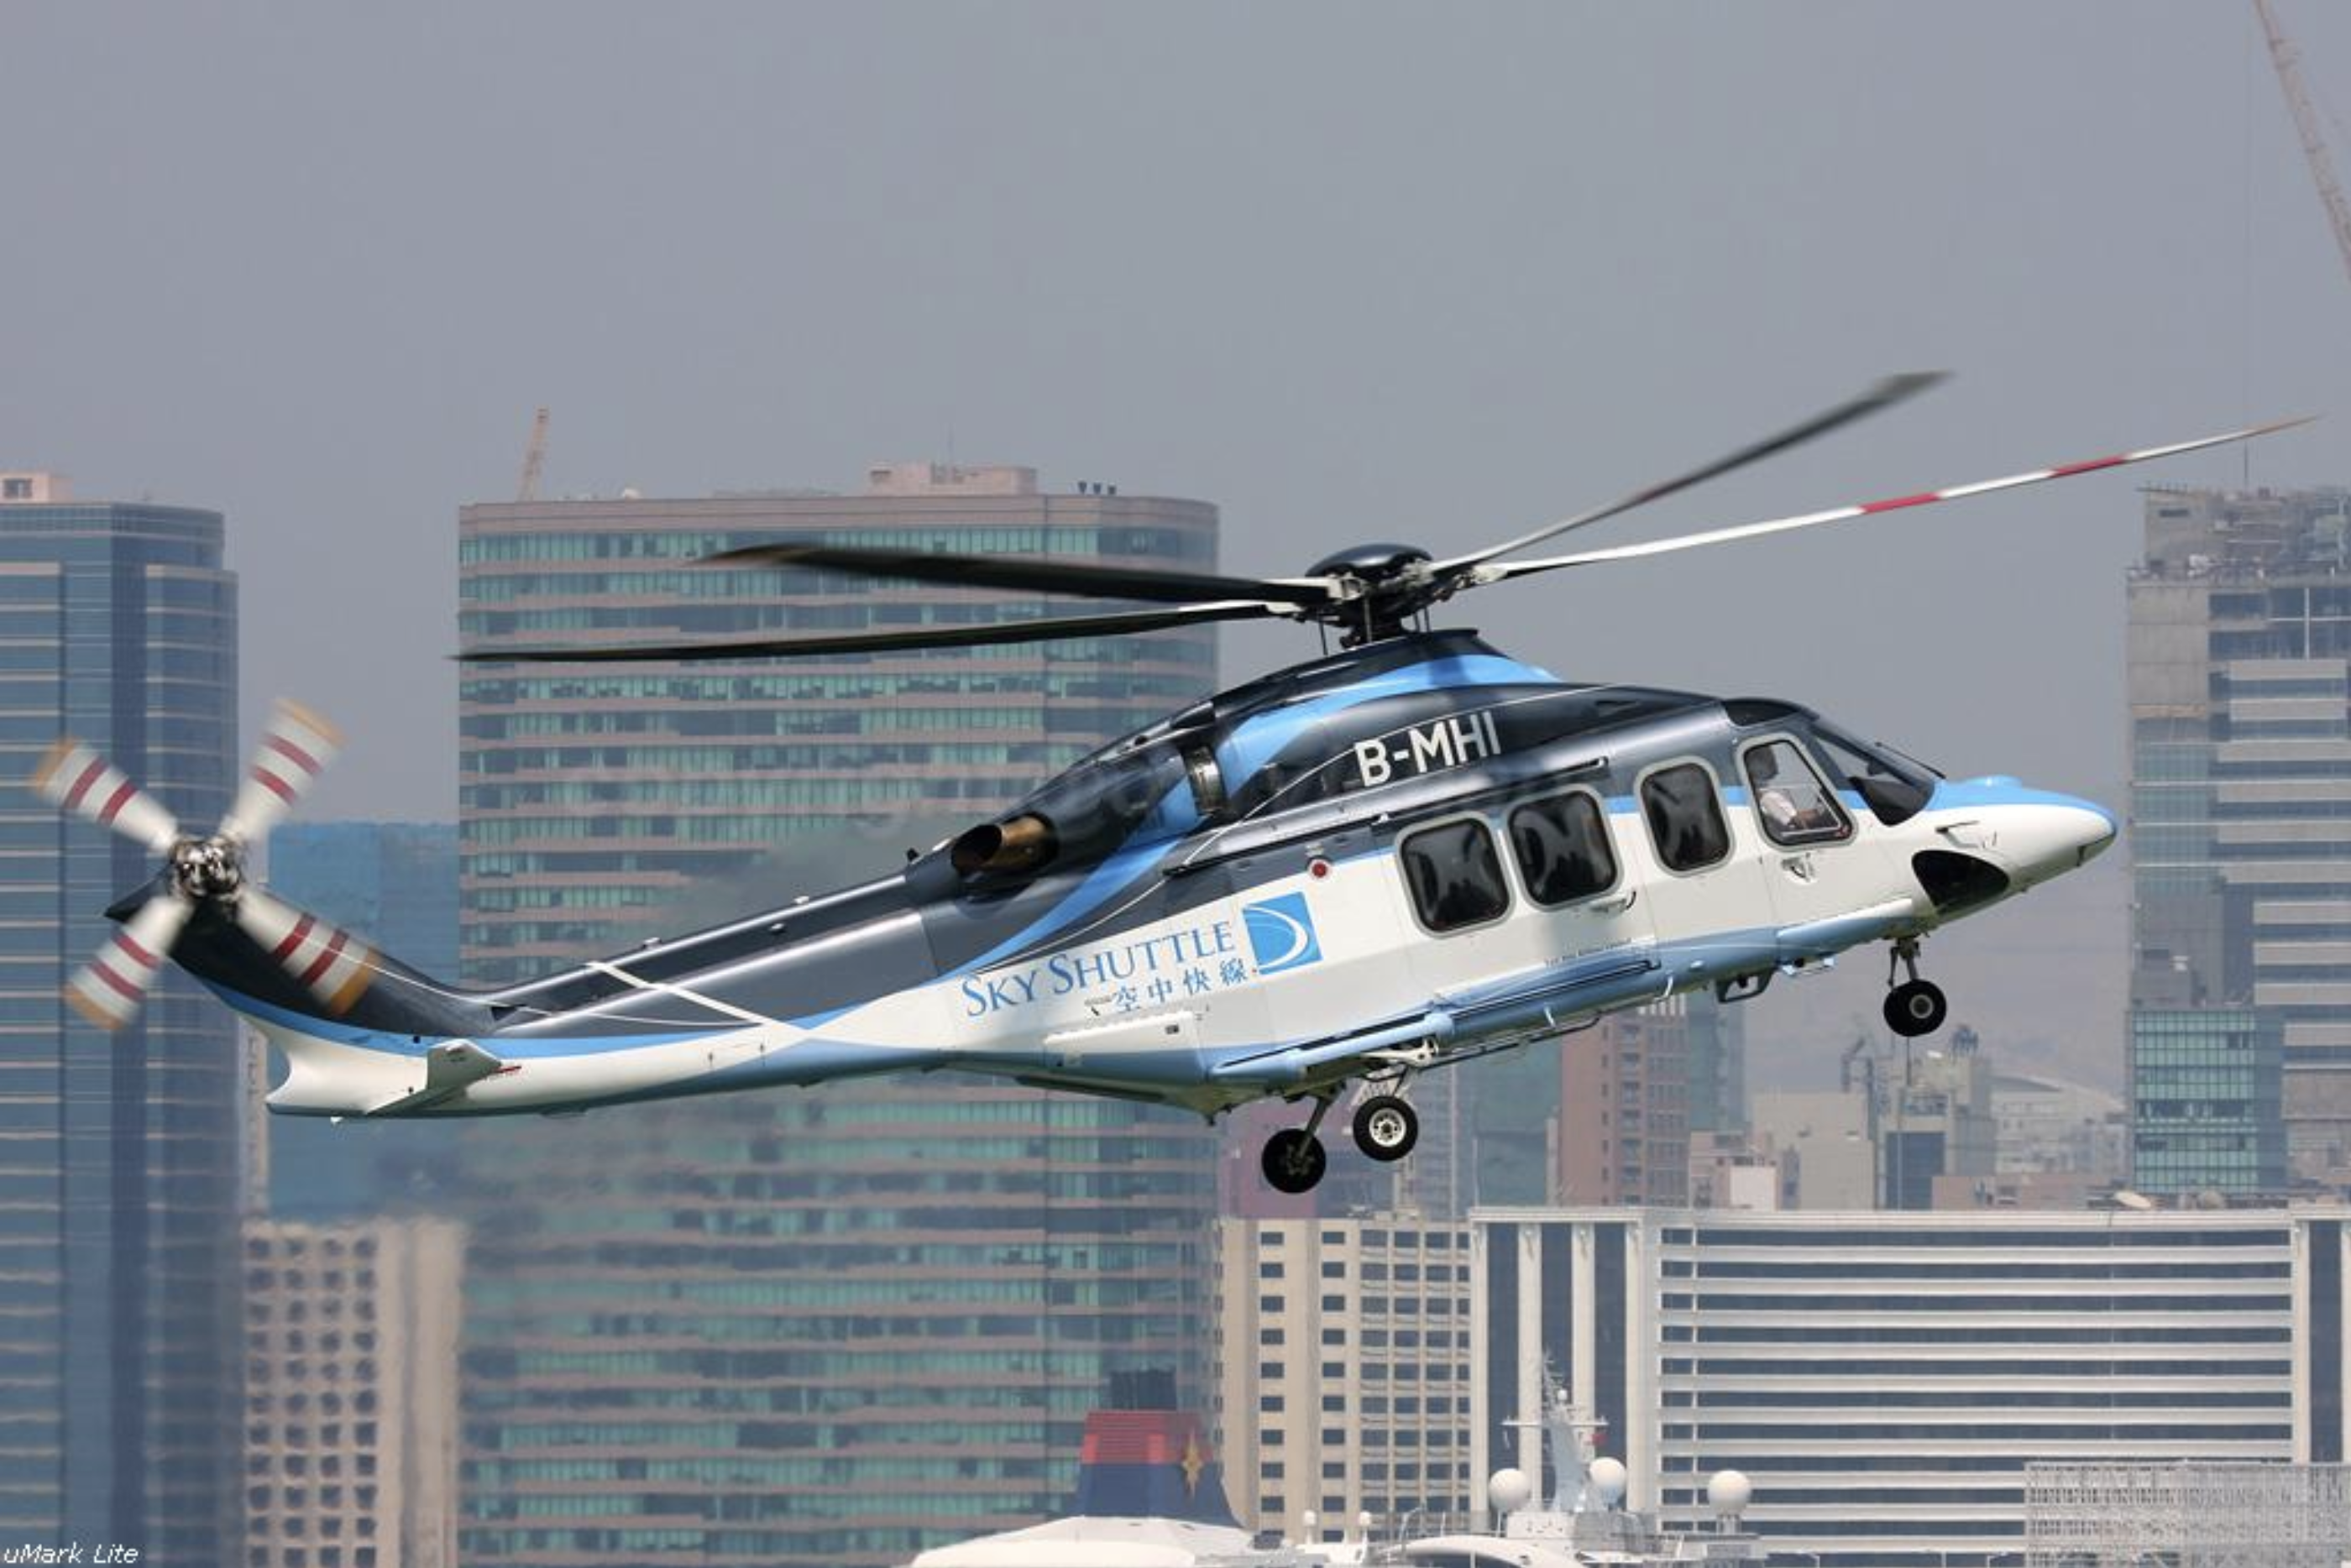 Quotas for chopper rides raised to over 1,500